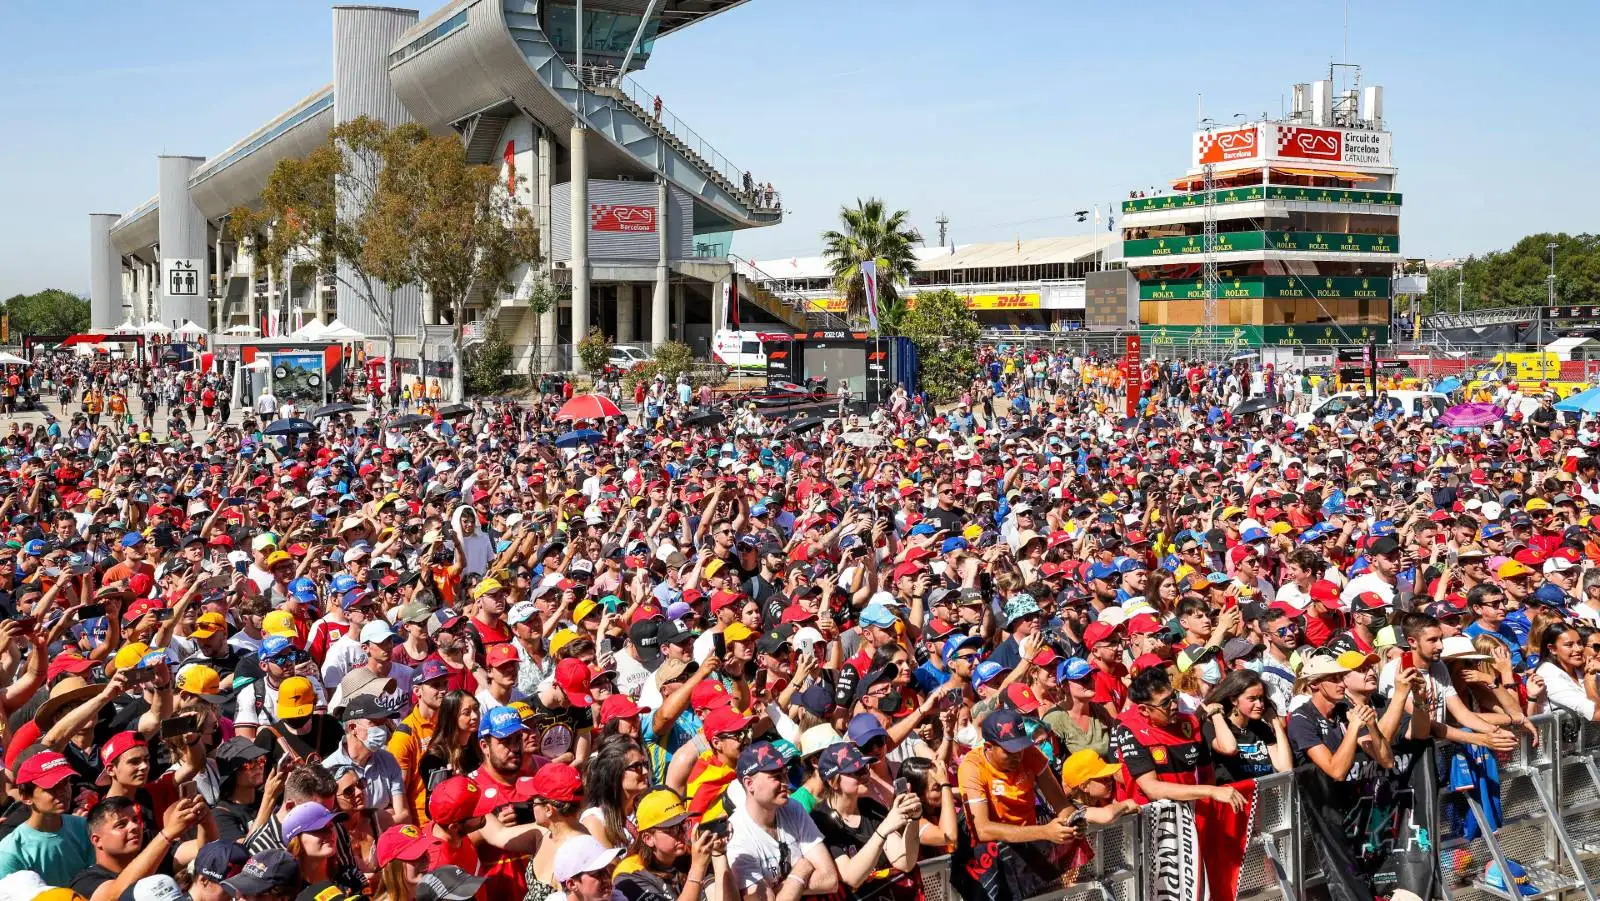 Crowds gather at the Spanish Grand Prix. Barcelona May 2022.